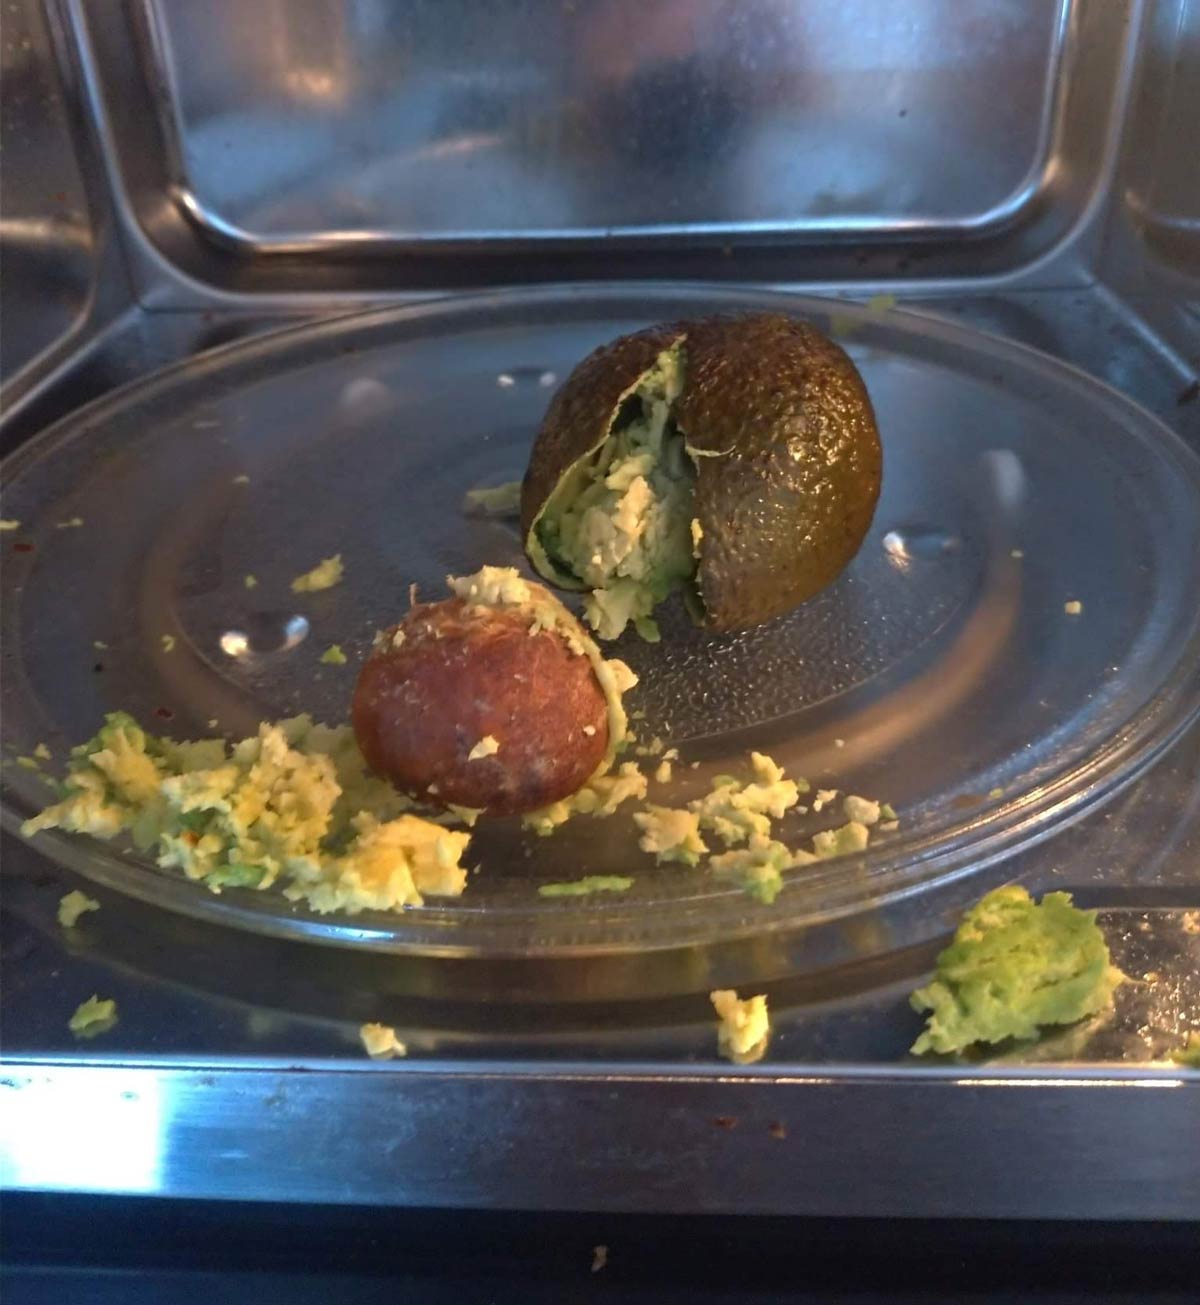 Don't try to microwave an avocado